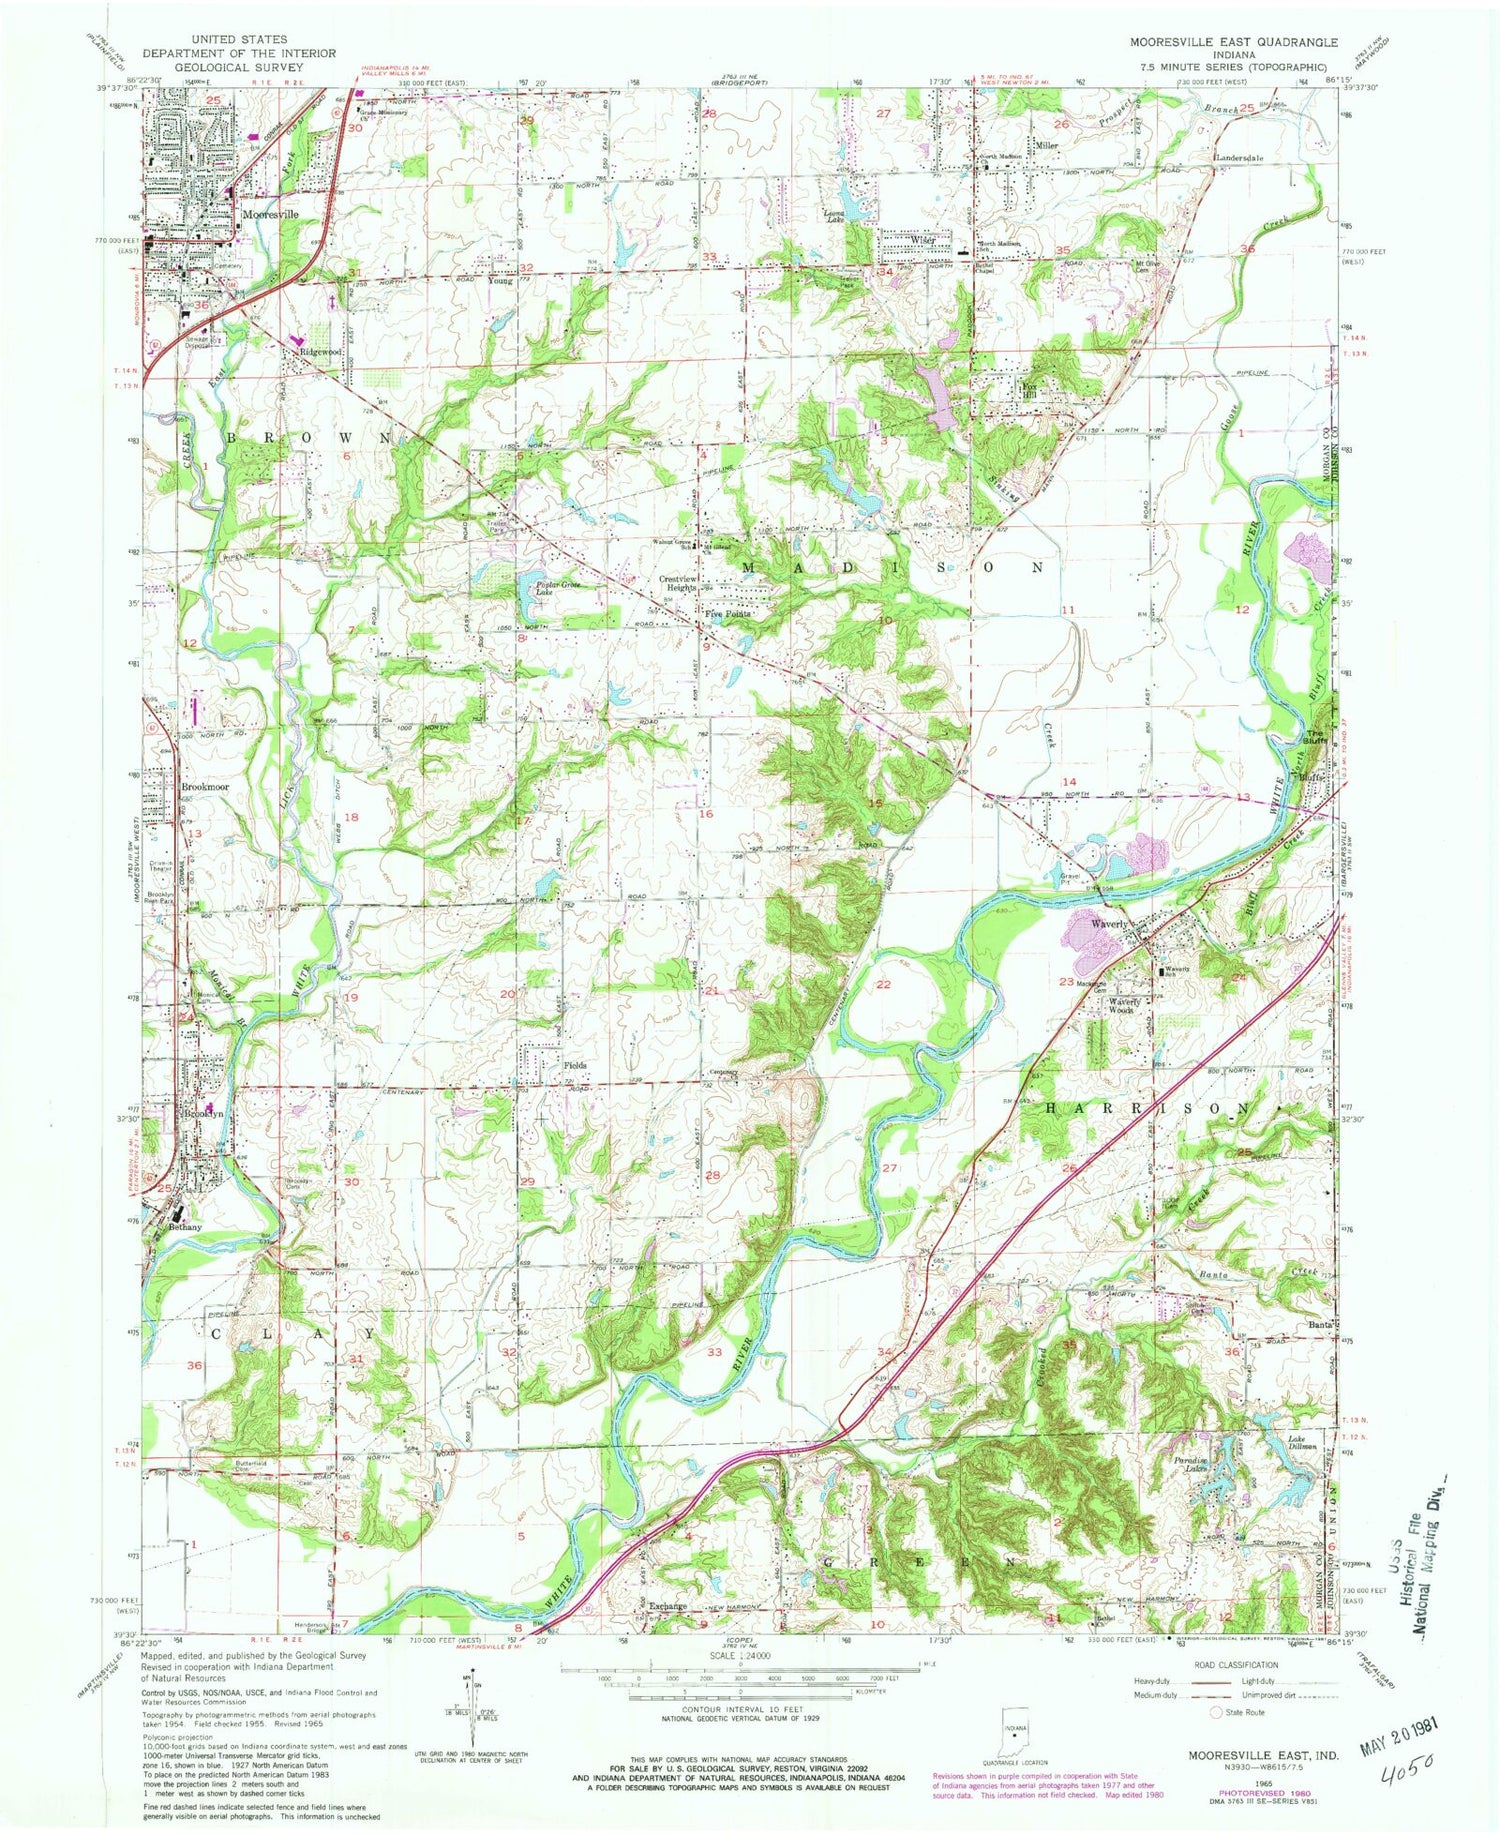 Classic USGS Mooresville East Indiana 7.5'x7.5' Topo Map Image